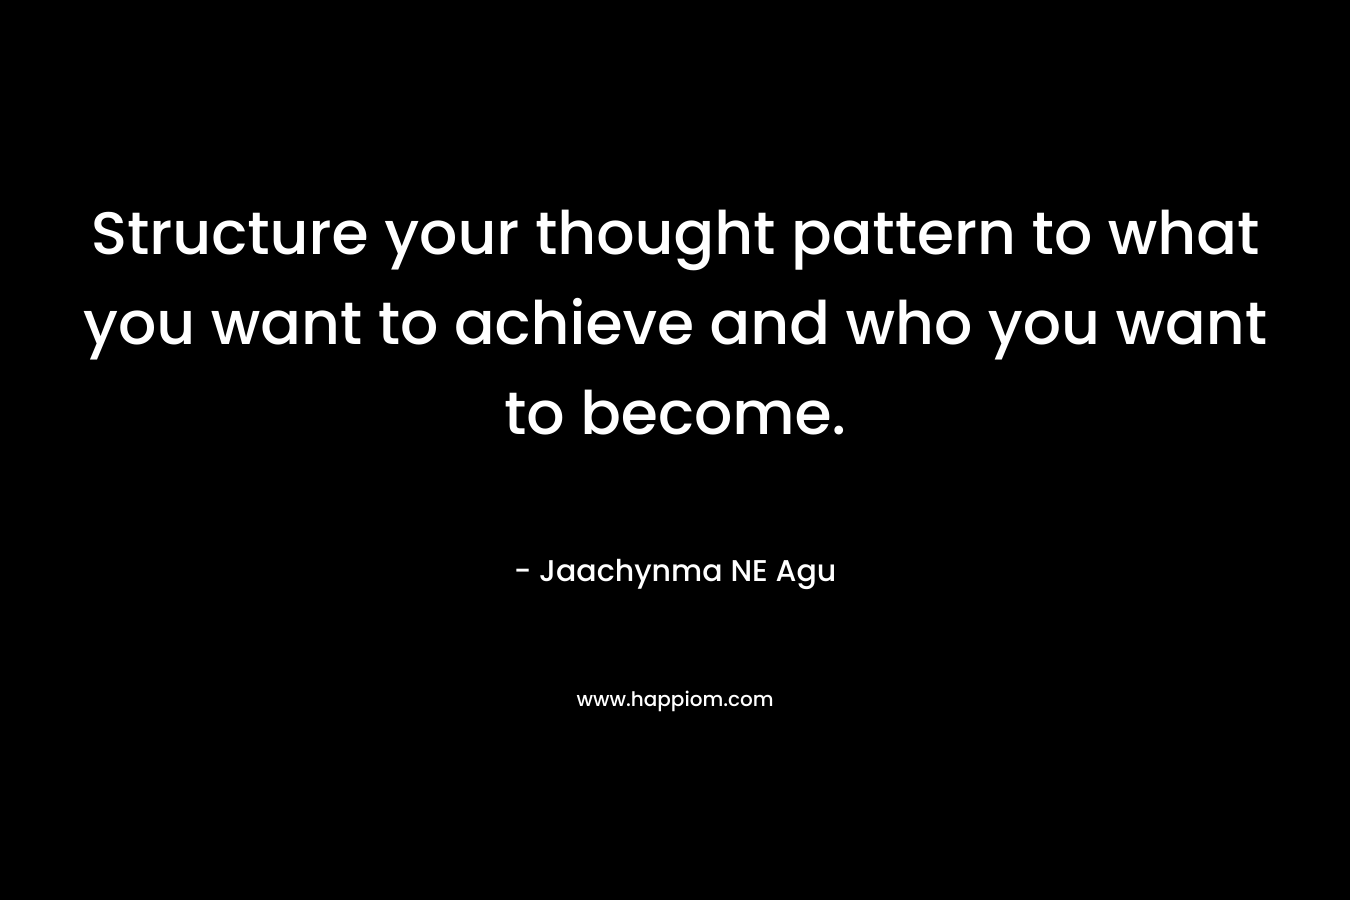 Structure your thought pattern to what you want to achieve and who you want to become.